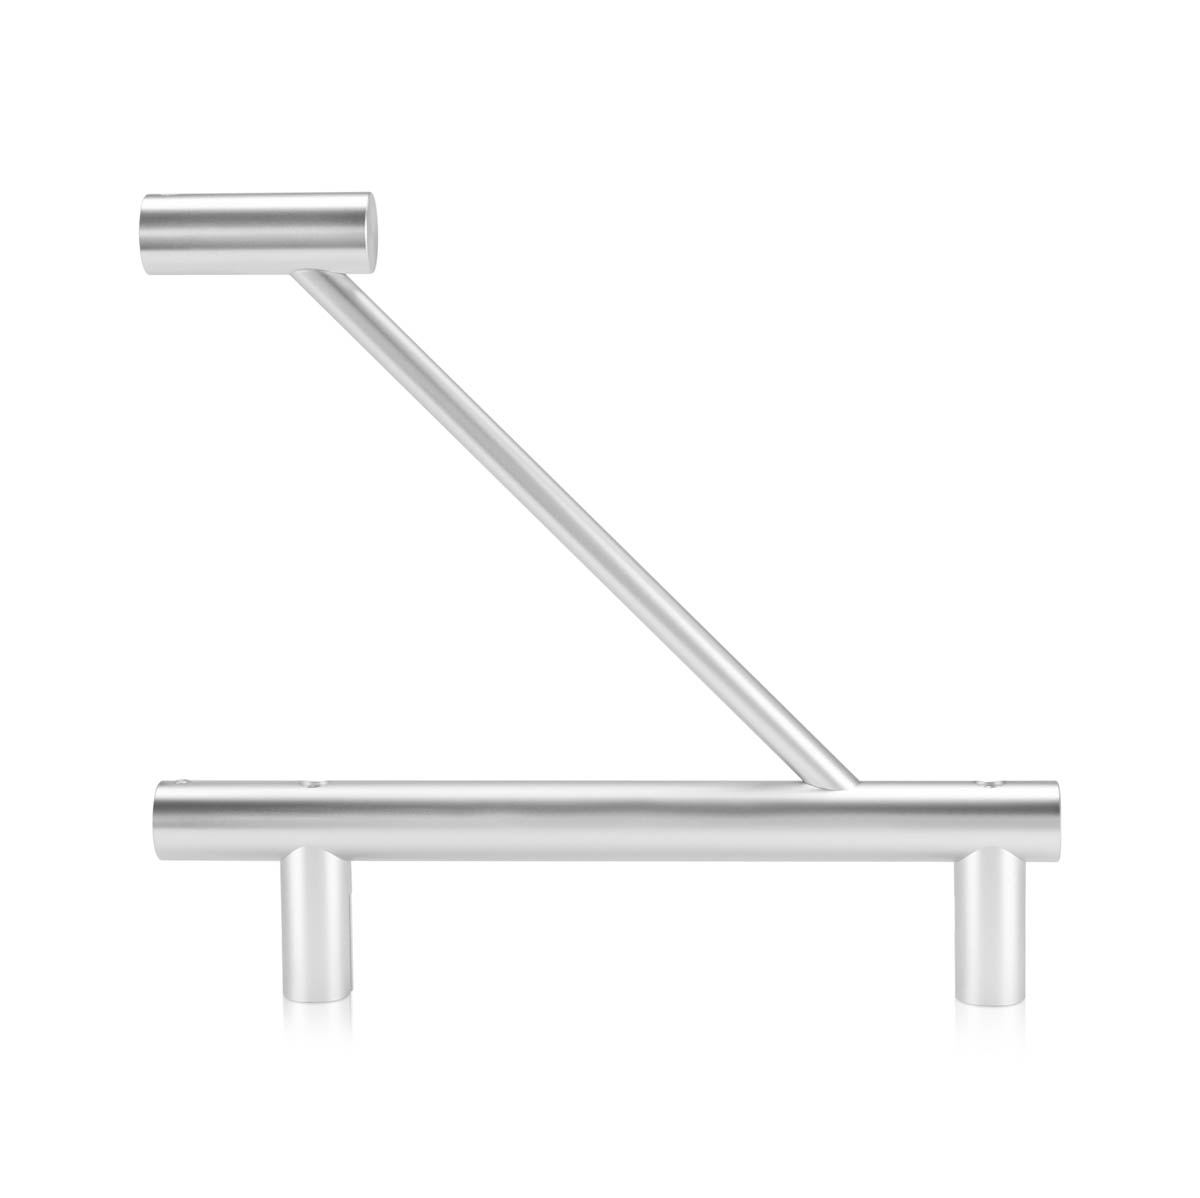 Aluminum Flag Sign Bracket Only, Clear Anodized Finish. 1/8'' Thickness Material Accepted, 7-7/8 Length, 3/4'' Diameter. (Sold Without Panel, Bracket Only)